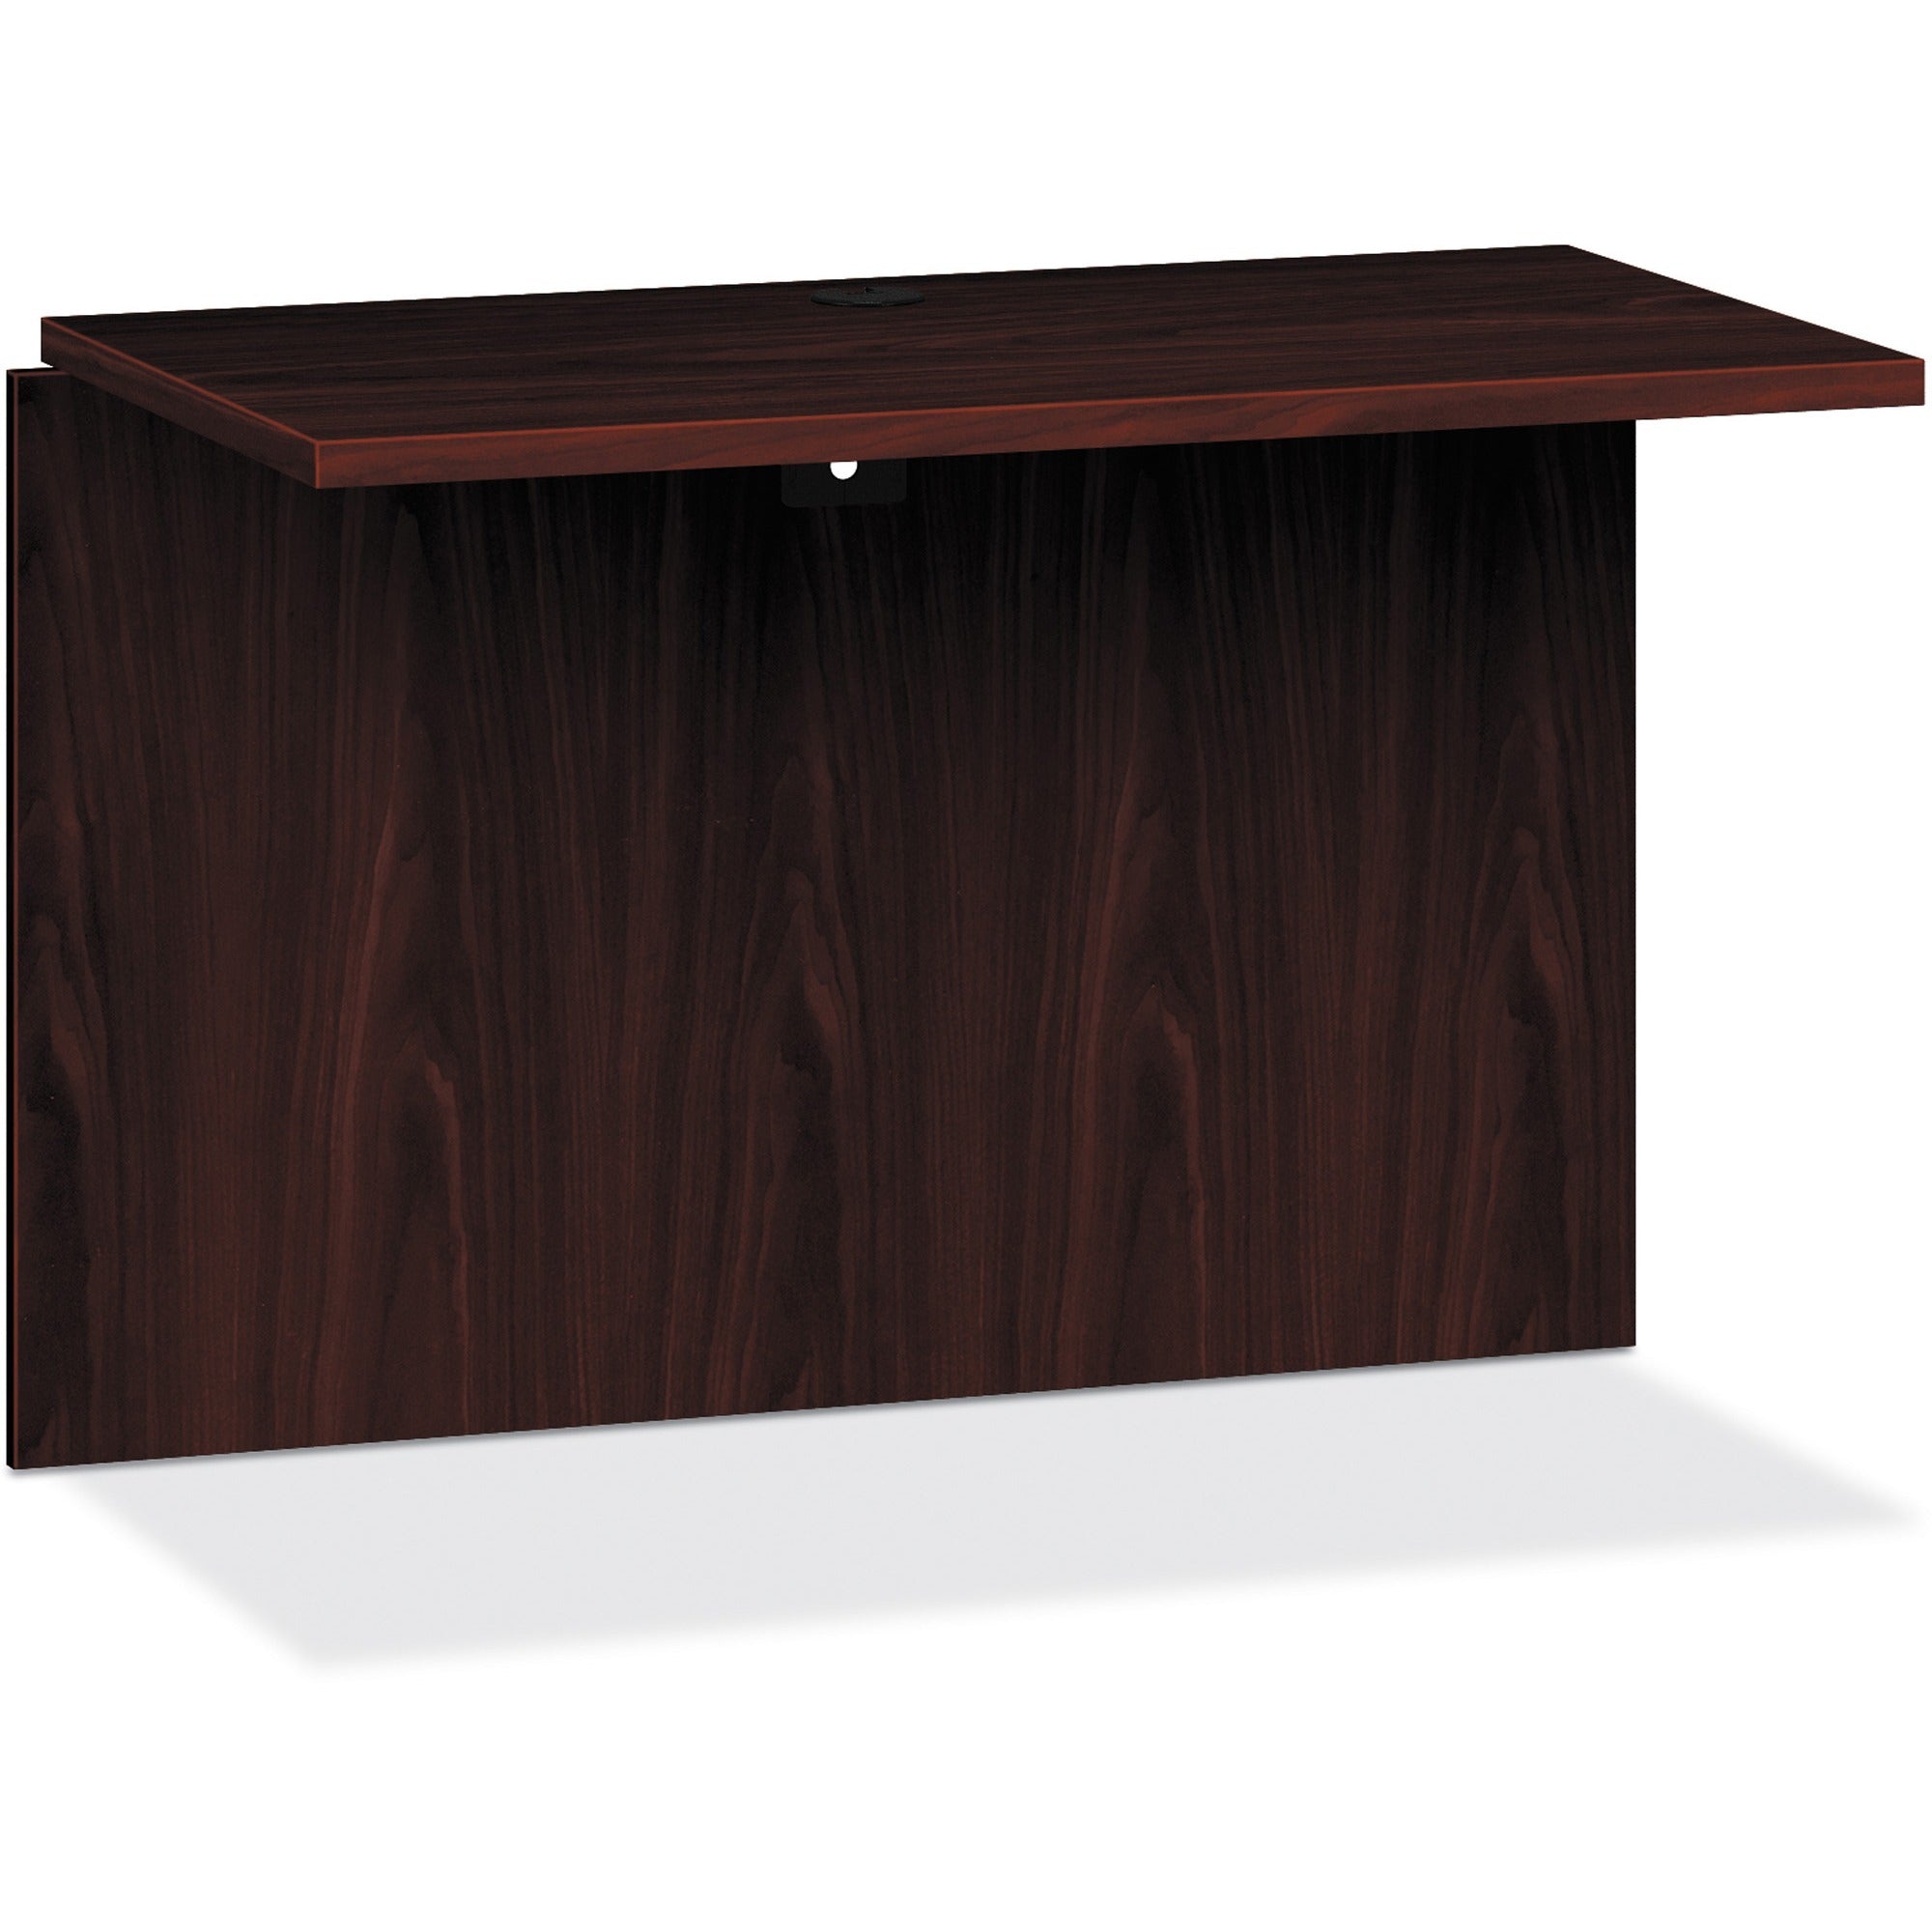 hon-10500-series-bridge-42-x-24295-square-edge-finish-laminate-mahogany-scratch-resistant-stain-resistant-for-office_hon10560nn - 1